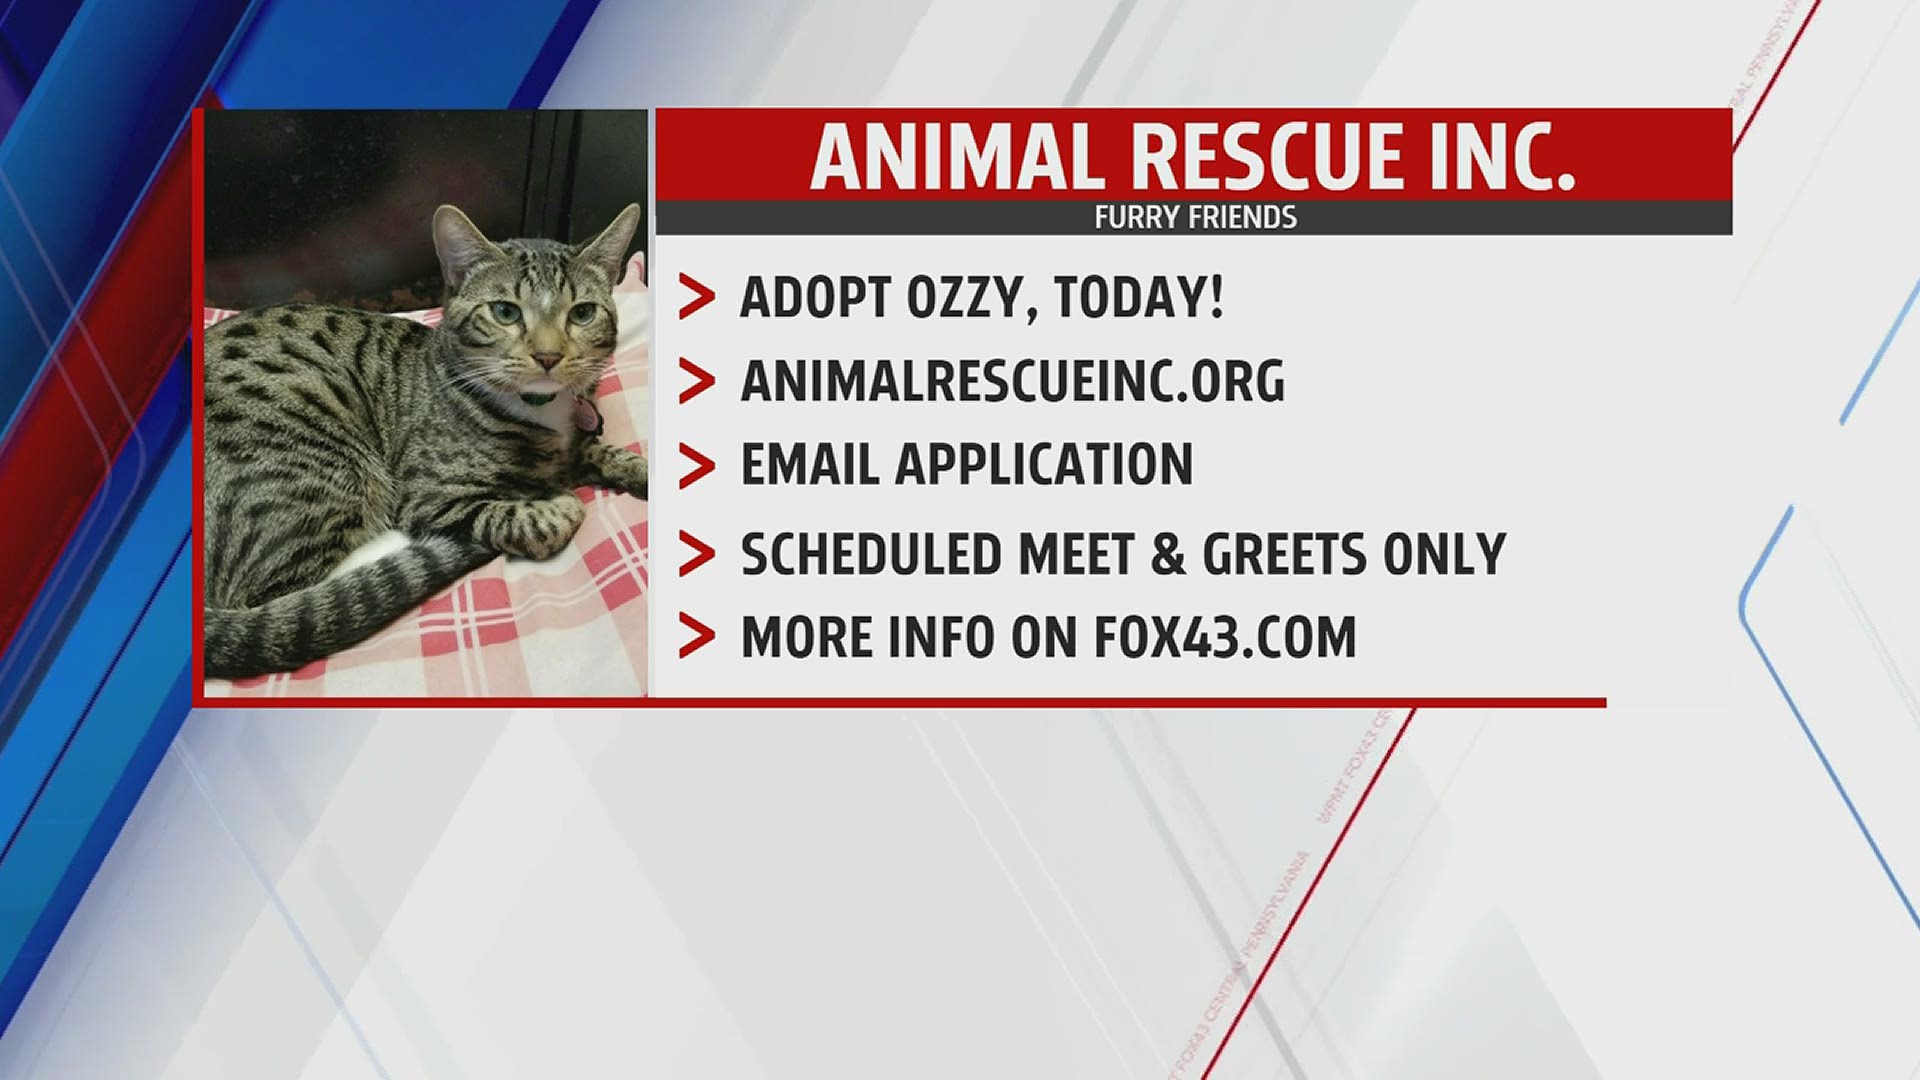 Today's Furry Friend is Ozzy, go online and schedule a meet and greet or email an application today